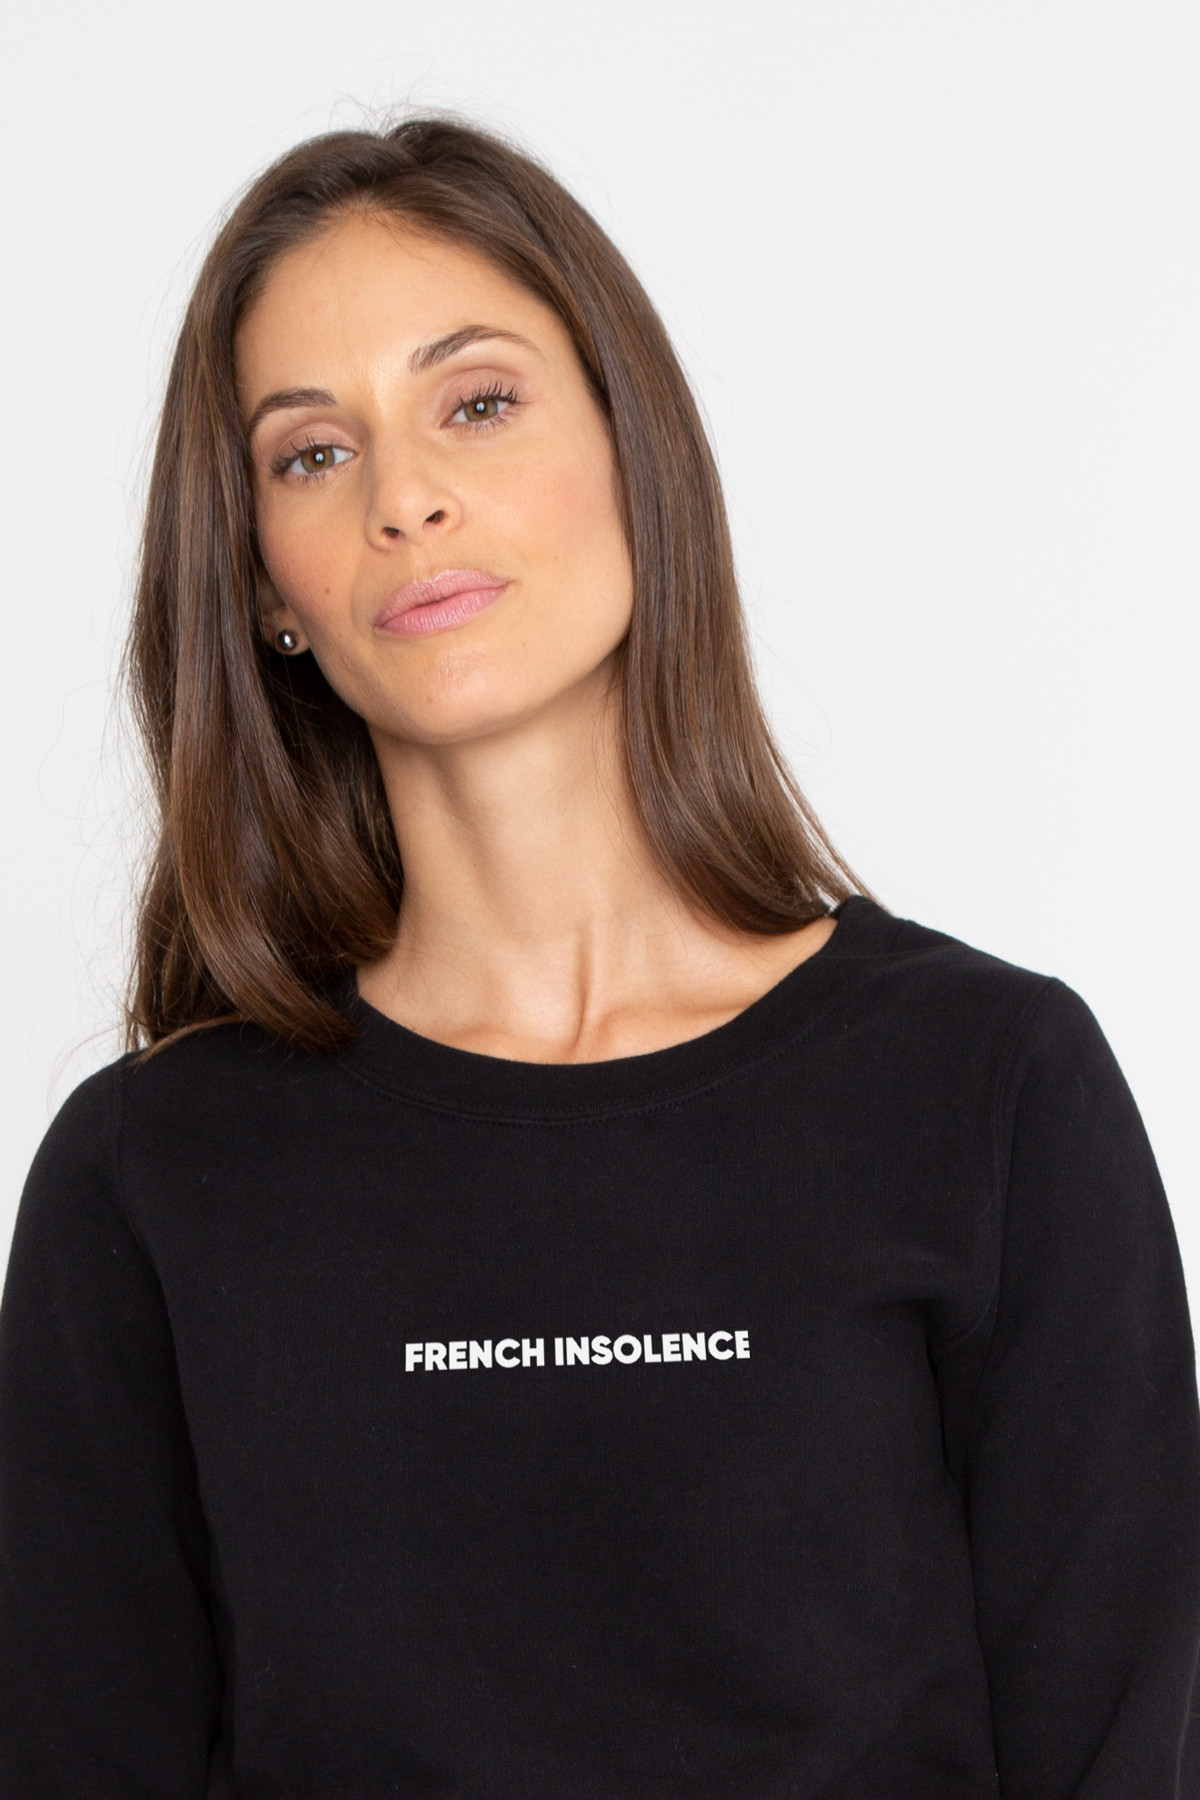 SweatFRENCH INSOLENCE